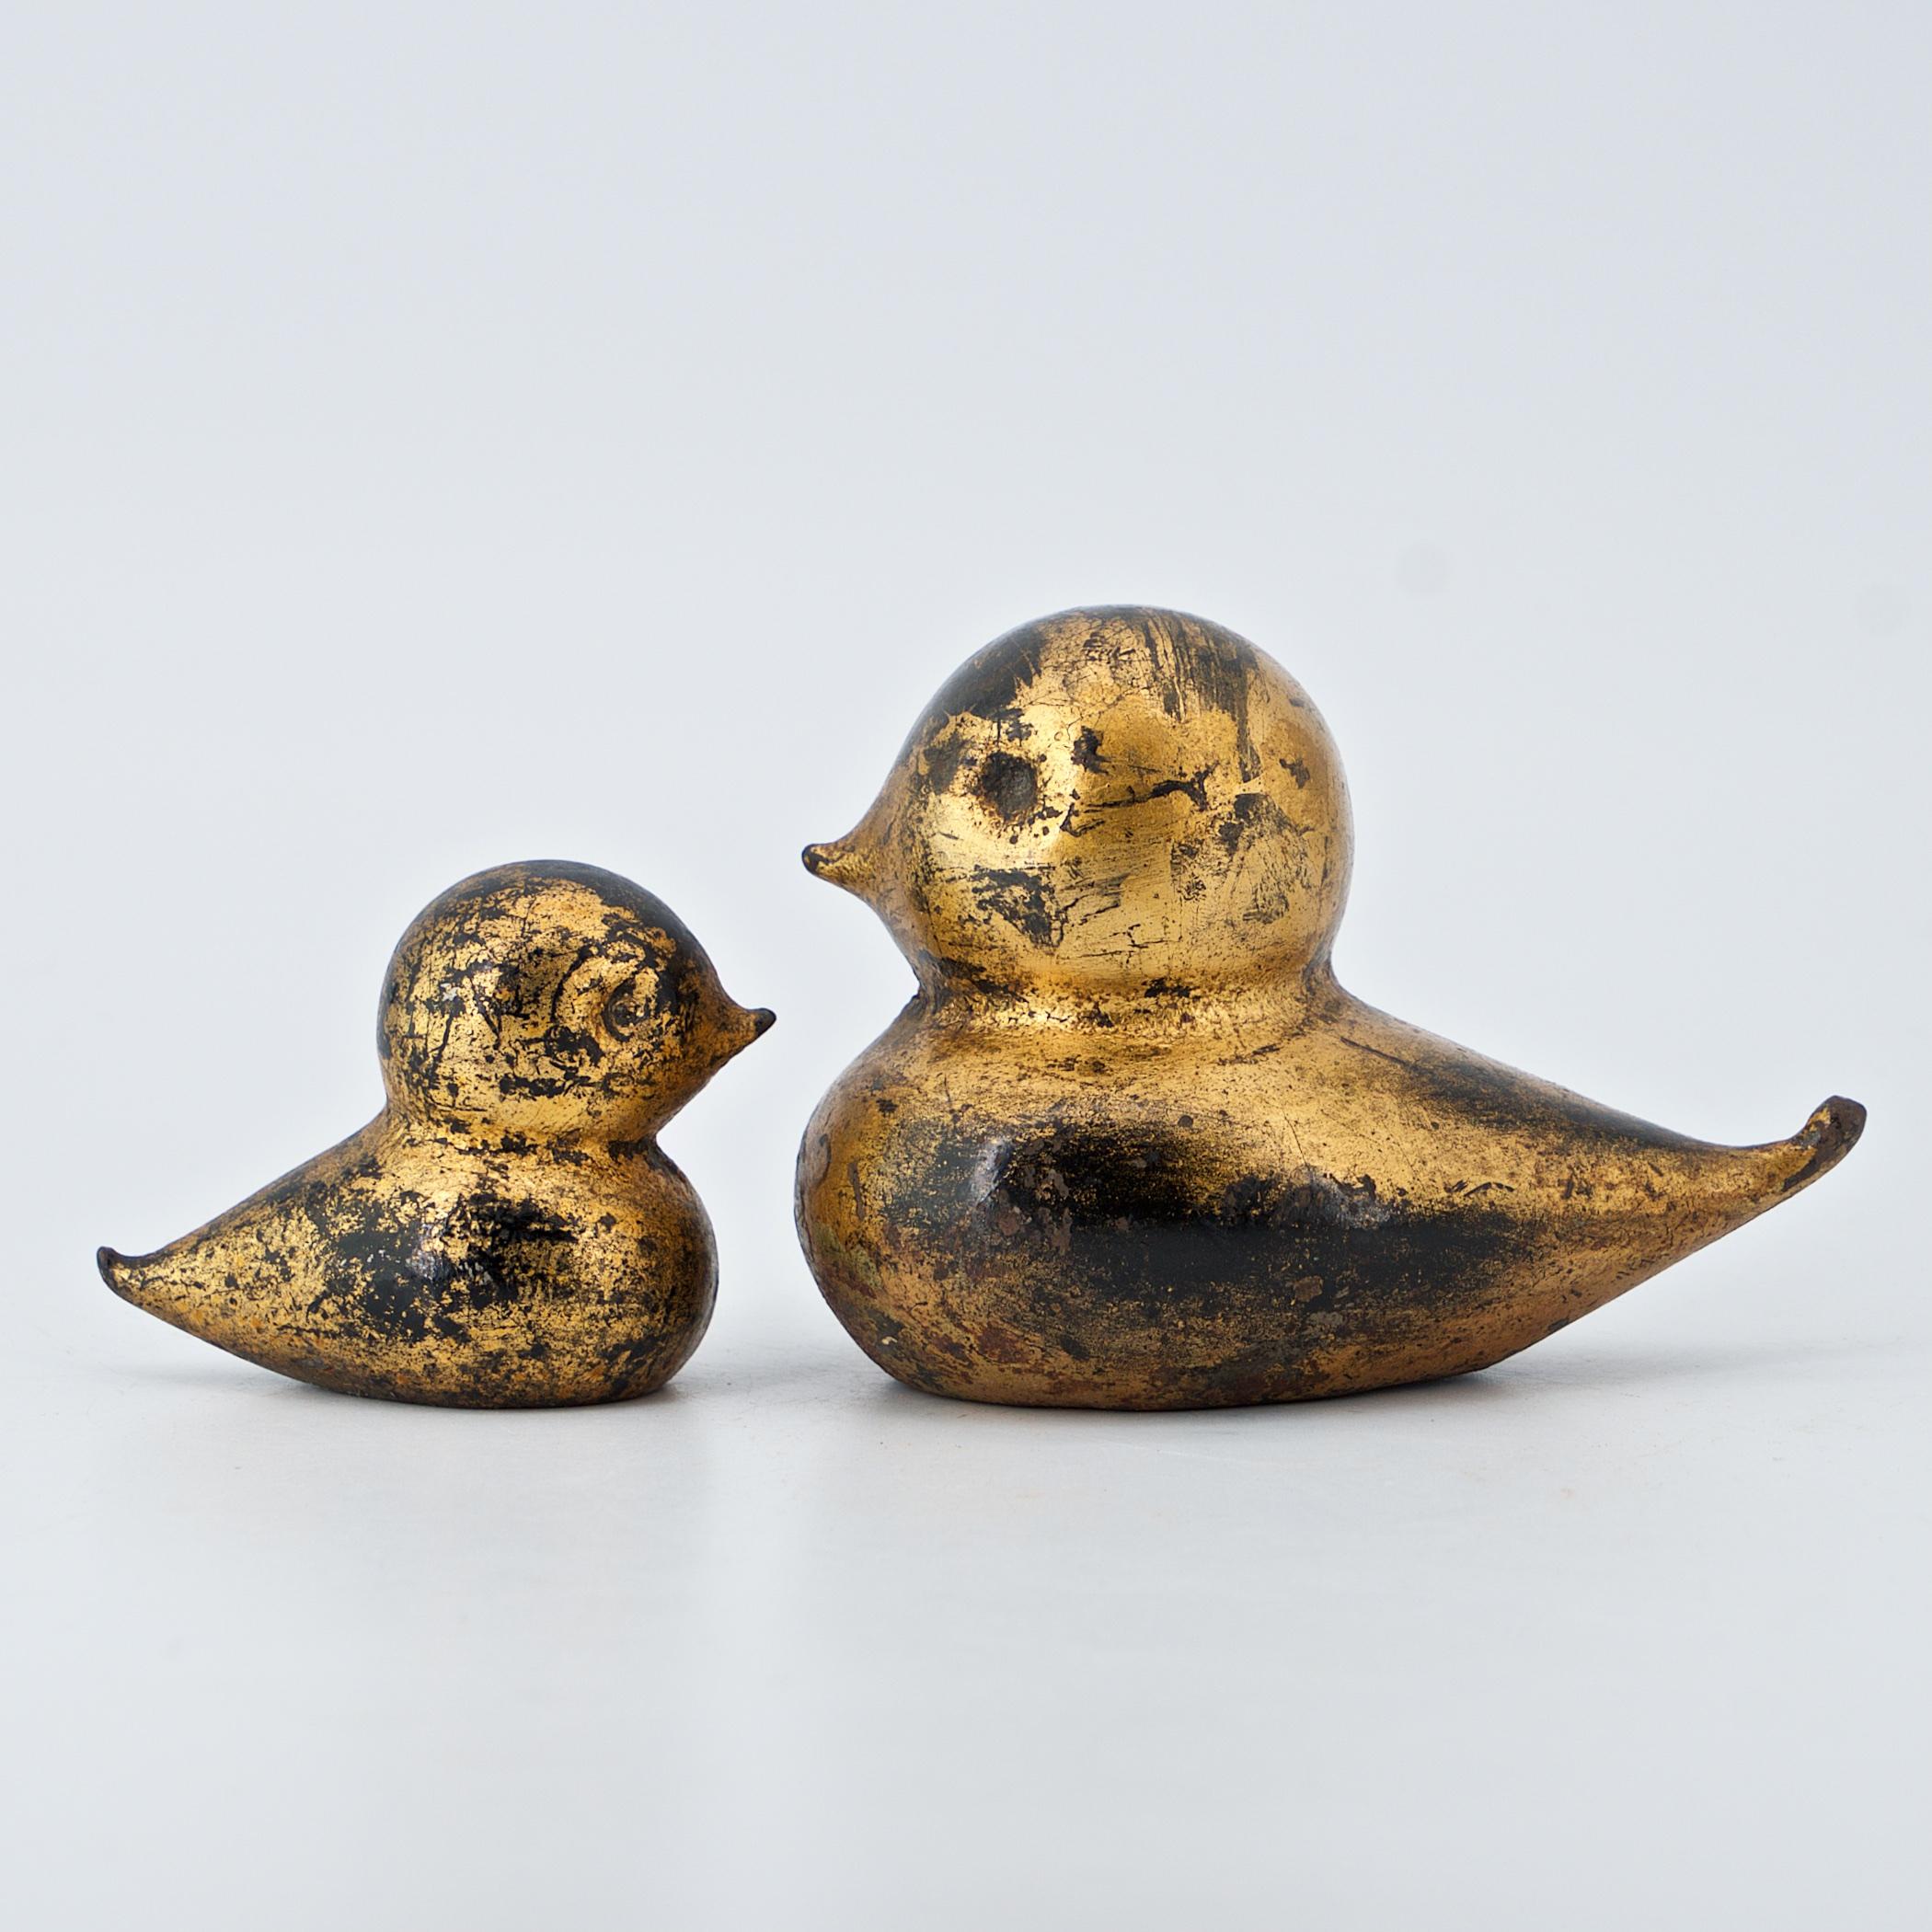 Rare pair of cast iron Kewpie birds; mother and child. Large one weighs approx. 2.5 lbs. and is 4 inches long, small one is about a third of that.